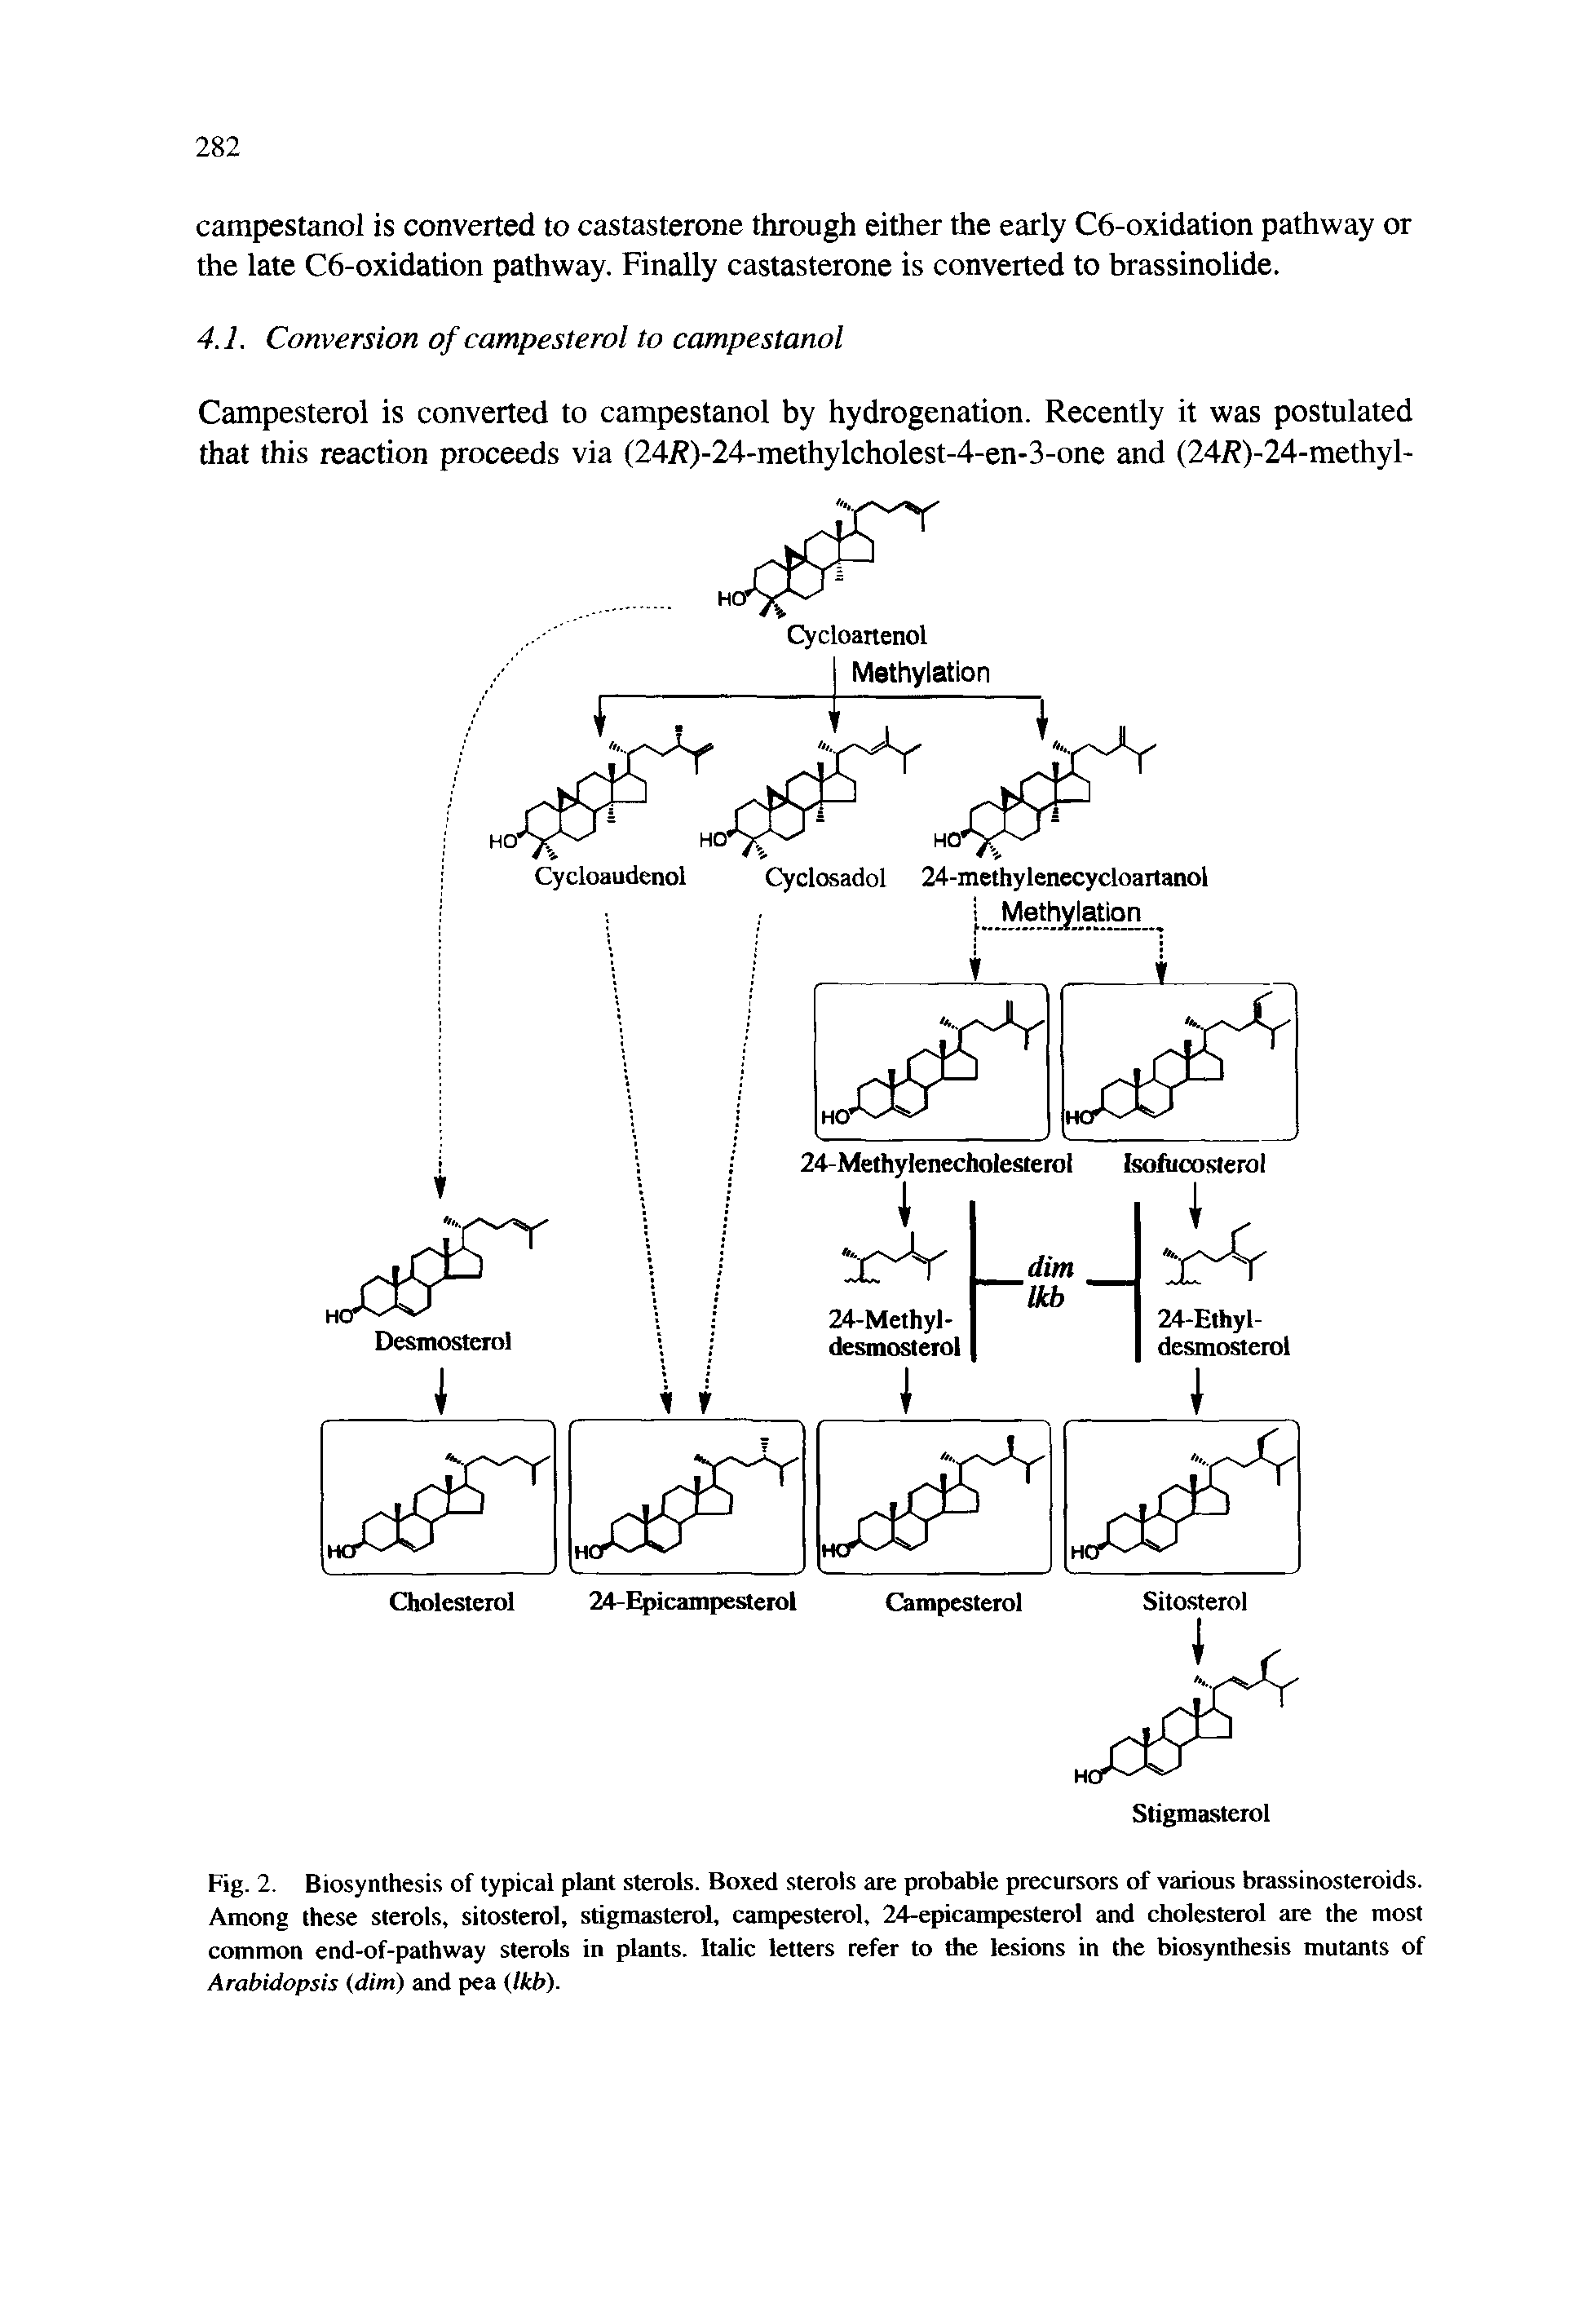 Fig. 2. Biosynthesis of typical plant sterols. Boxed sterols are probable precursors of various brassinosteroids. Among these sterols, sitosterol, stigmasterol, campesterol, 24-epicampesterol and cholesterol are the most common end-of-pathway sterols in plants. Italic letters refer to the lesions in the biosynthesis mutants of Arabidopsis (dim) and pea (Ikb).